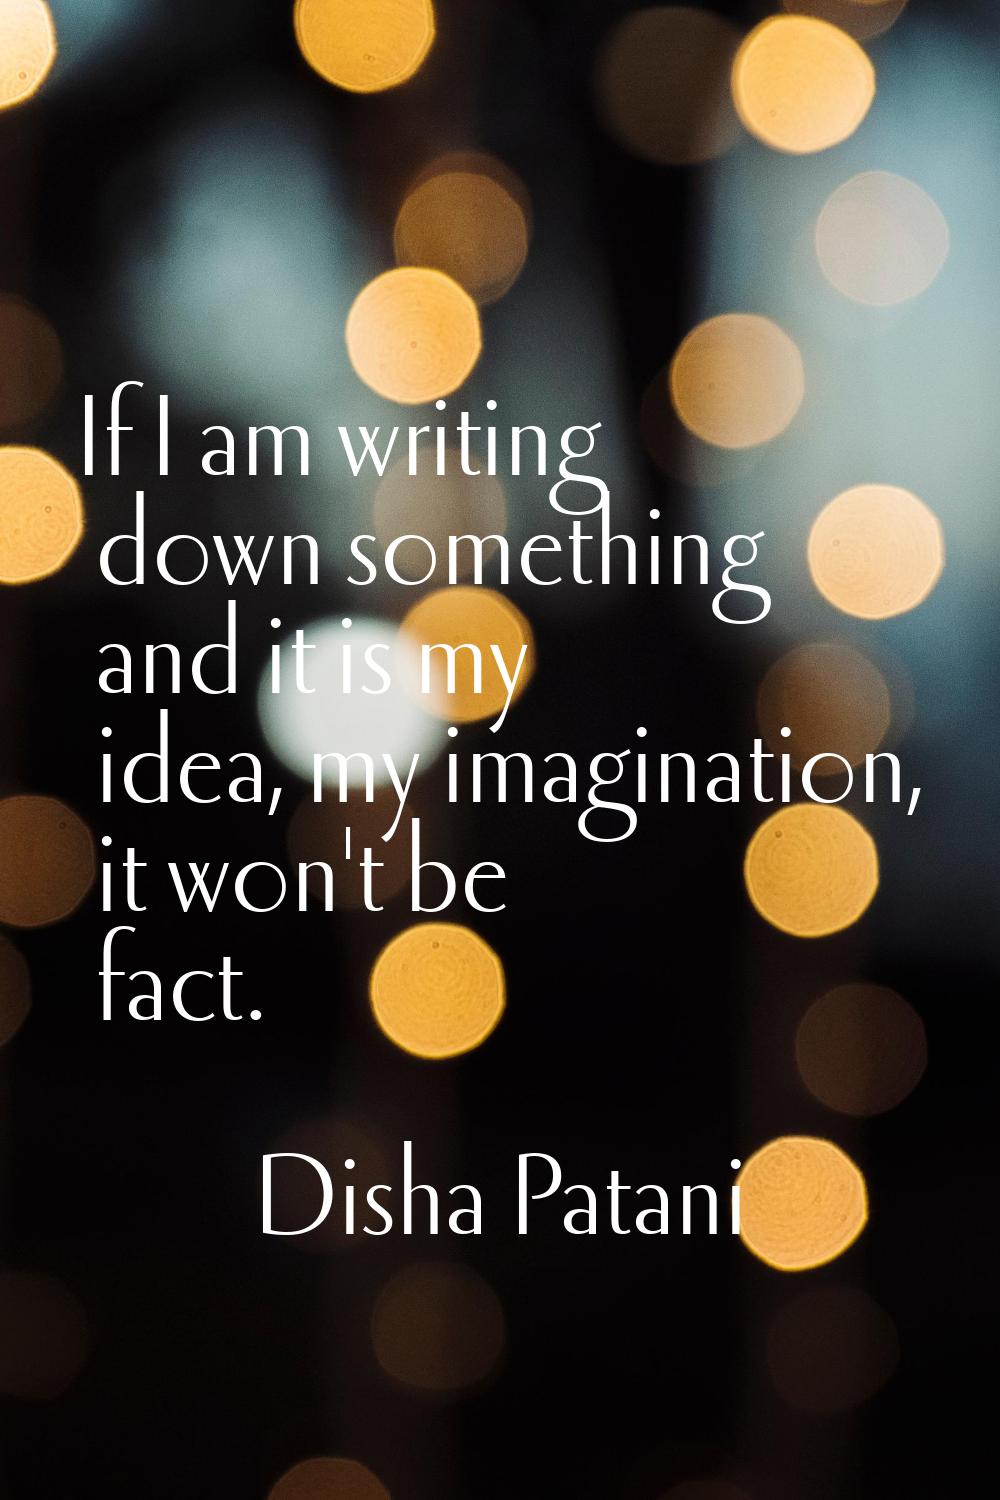 If I am writing down something and it is my idea, my imagination, it won't be fact.